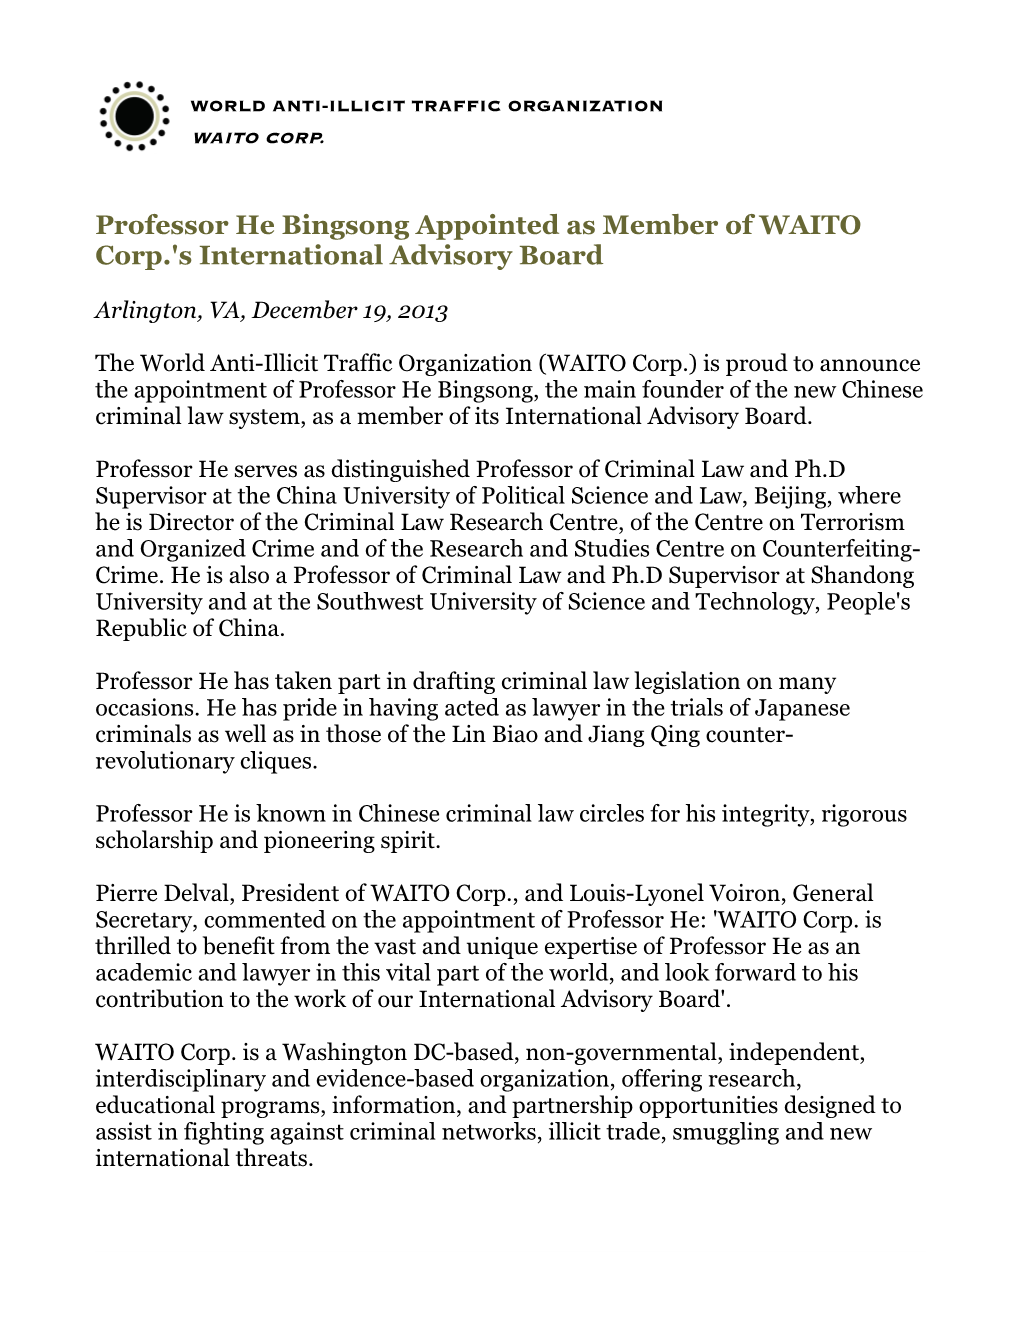 Professor He Bingsong Appointed As Member of WAITO Corp.'S International Advisory Board